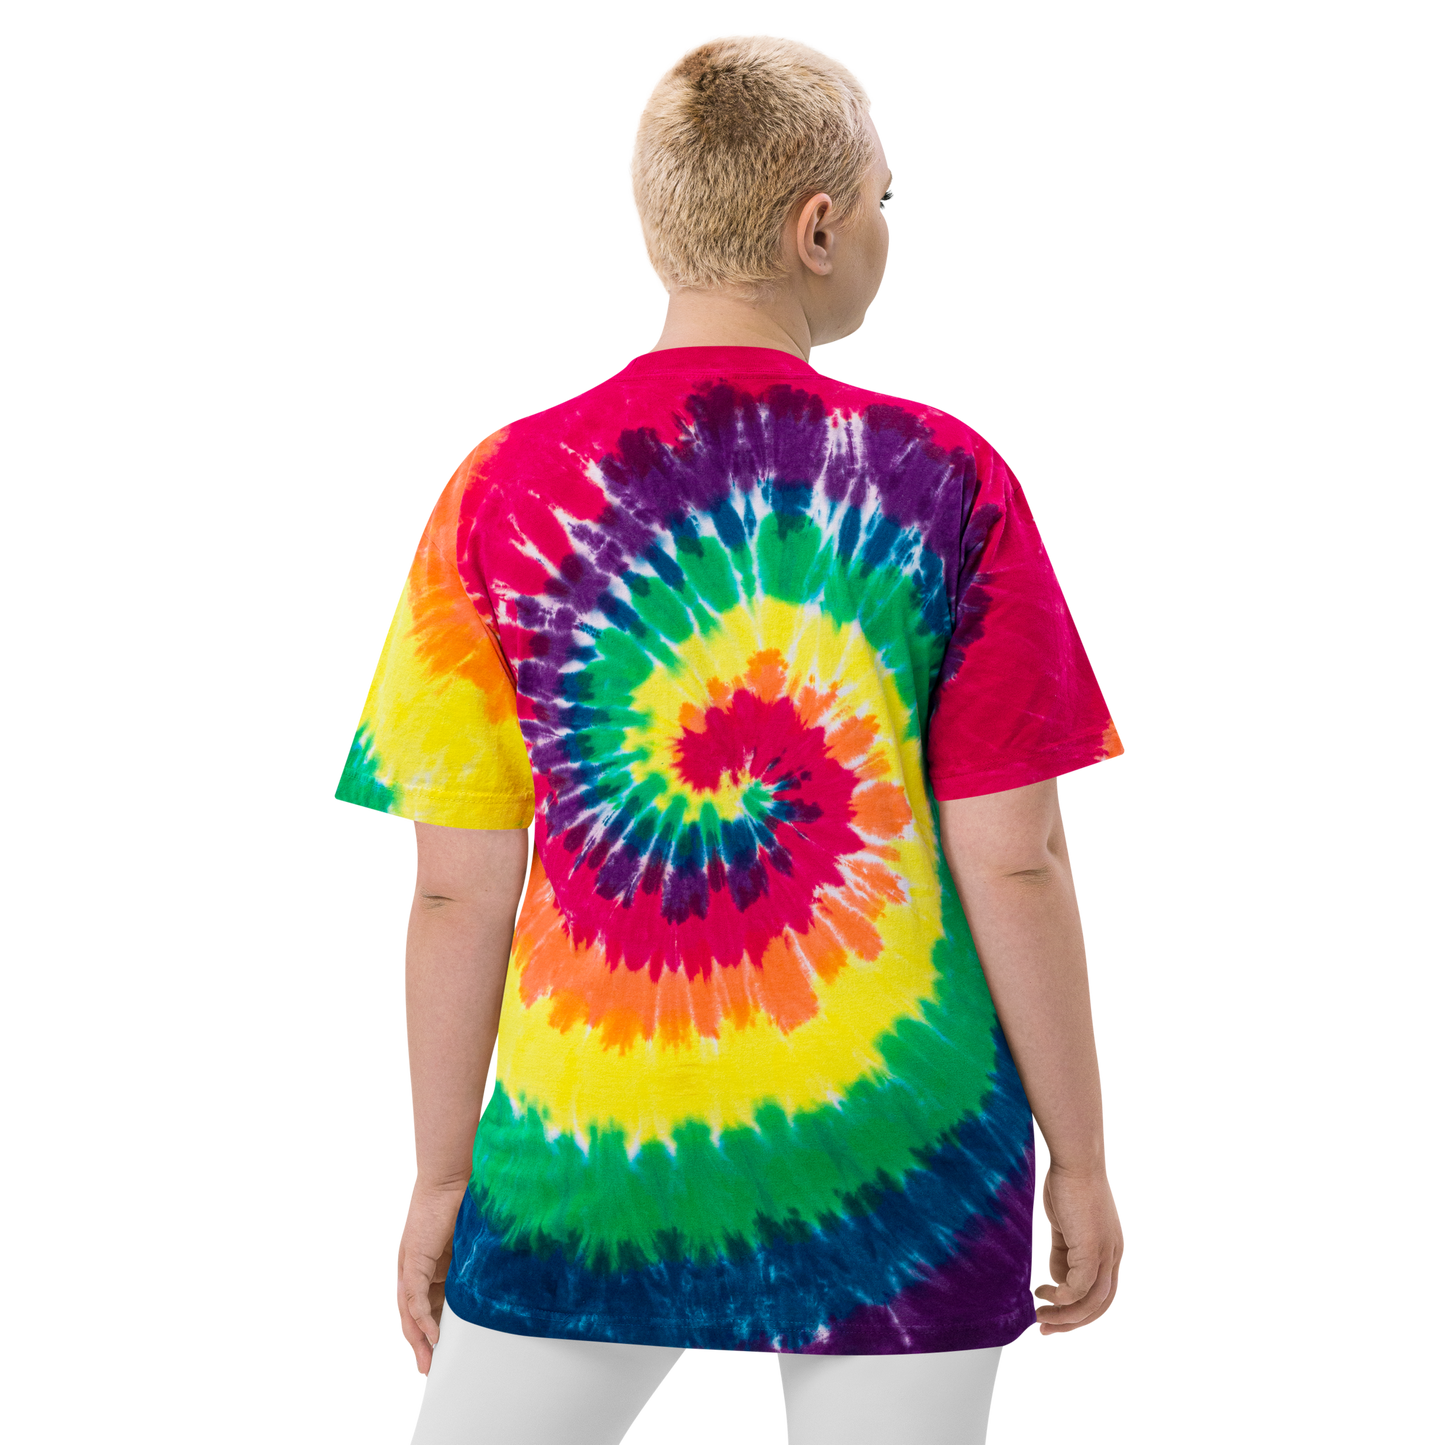 YHM Designs - YFC Fredericton Oversized Tie-Dye T-Shirt - Crossed-X Design with Airport Code and Vintage Propliner - White Embroidery - Image 14